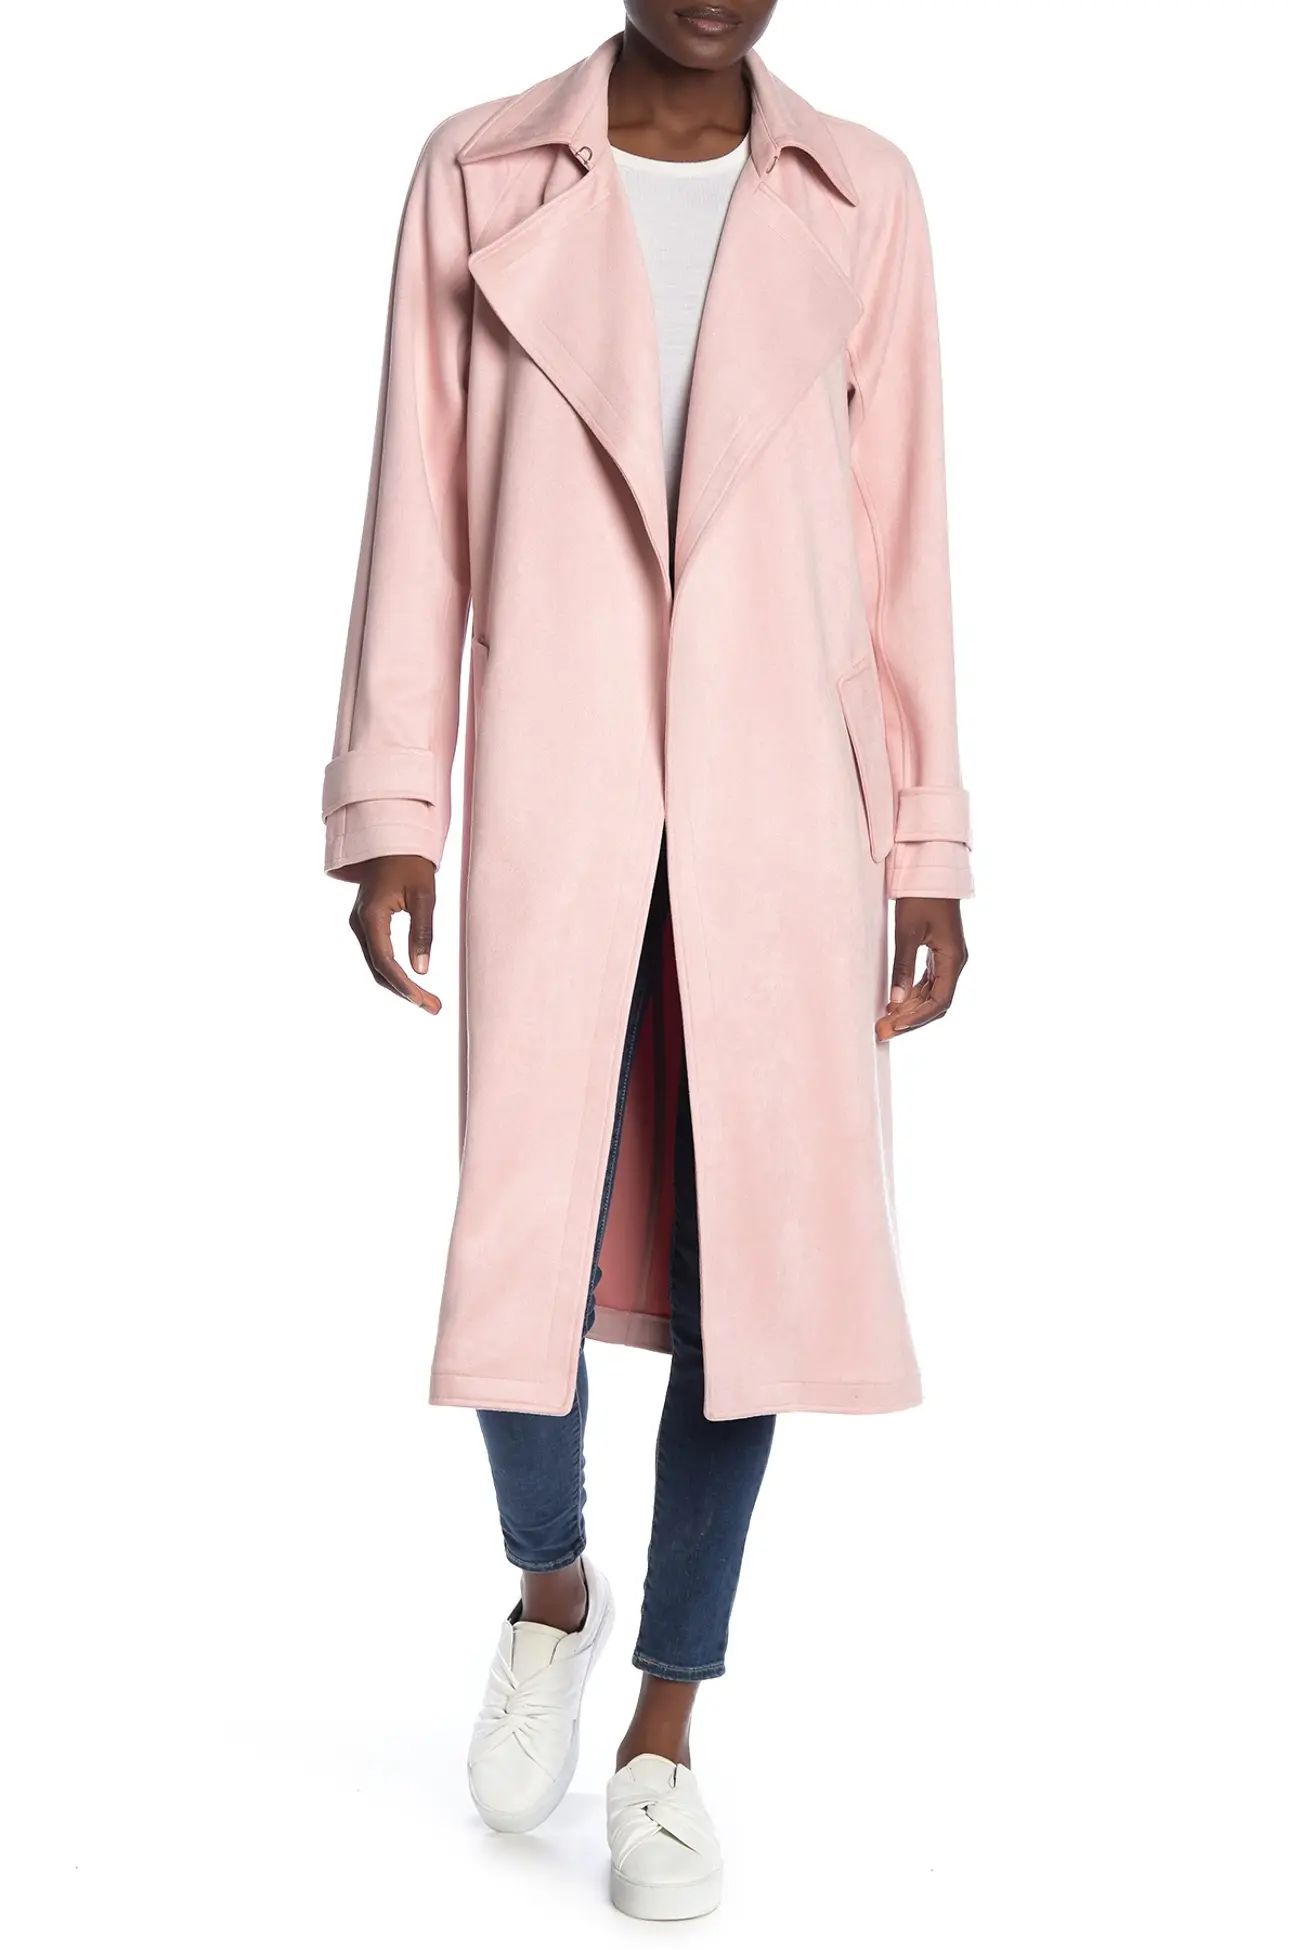 Bagatelle | Faux Suede Open Front Draped Trench Coat | Nordstrom Rack | Nordstrom Rack